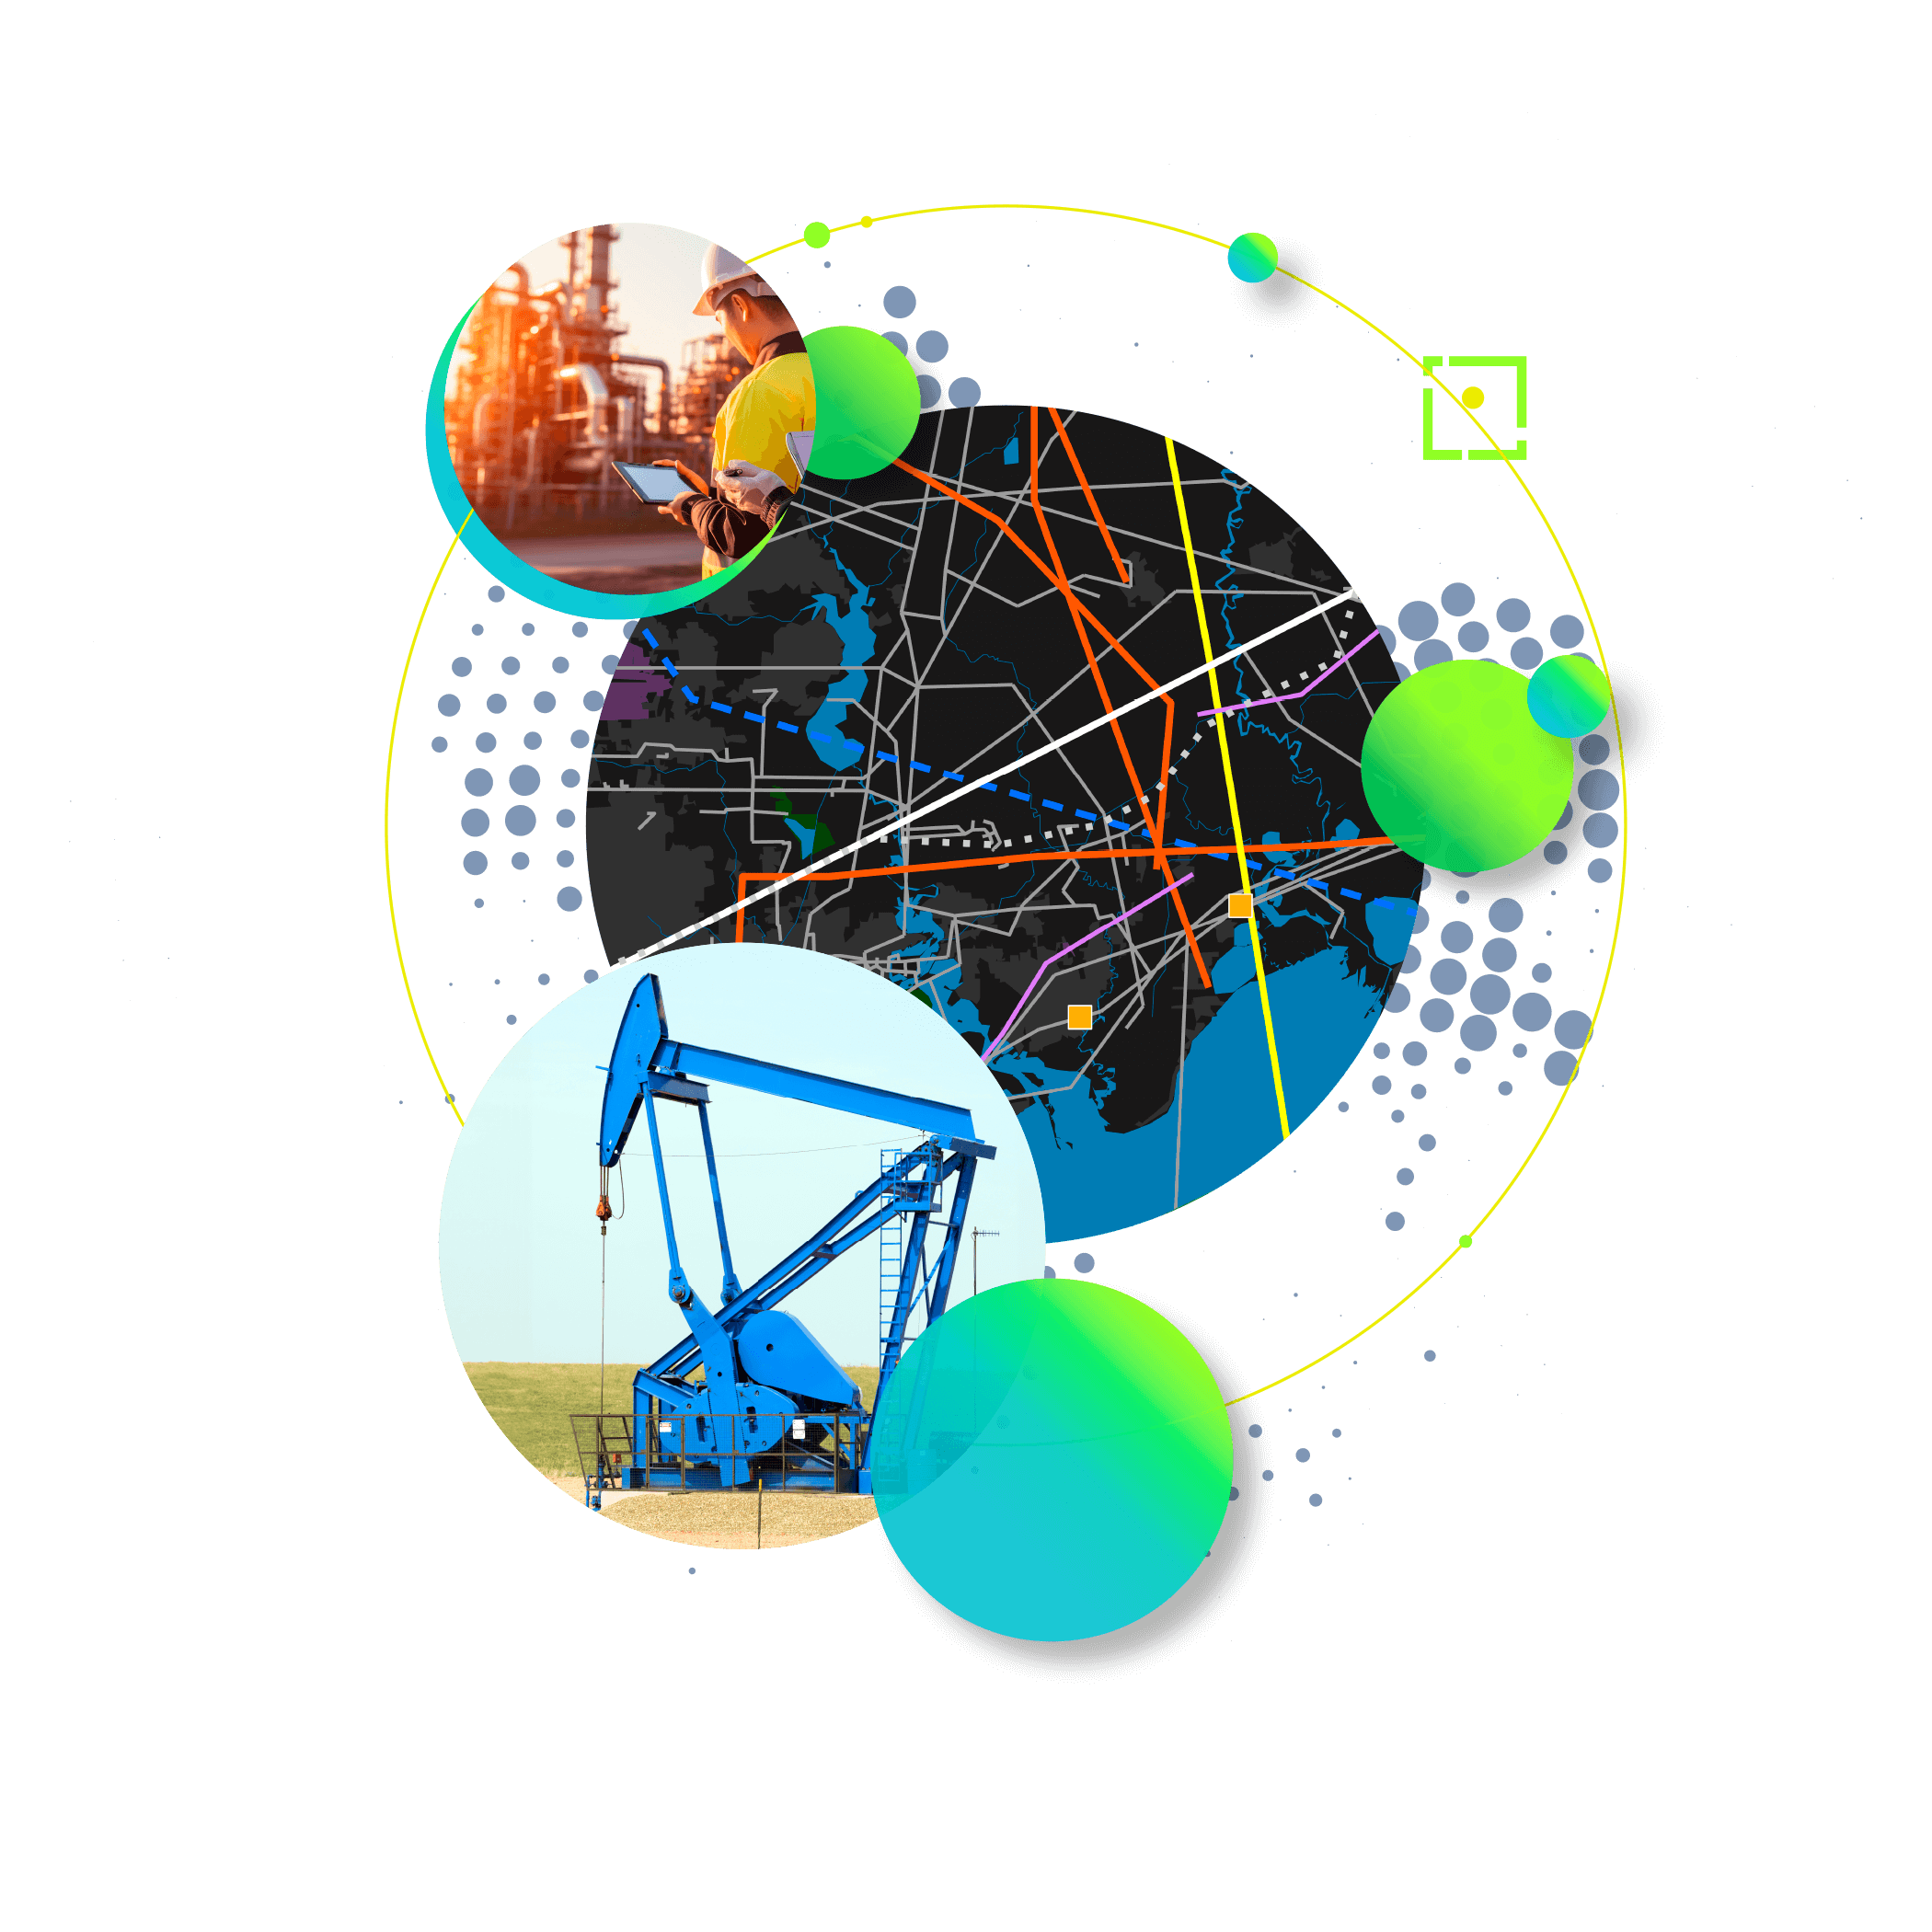 Circular images of a mobile worker at an oil refinery, a blue oil well, and a map of varying pipelines and energy infrastructure